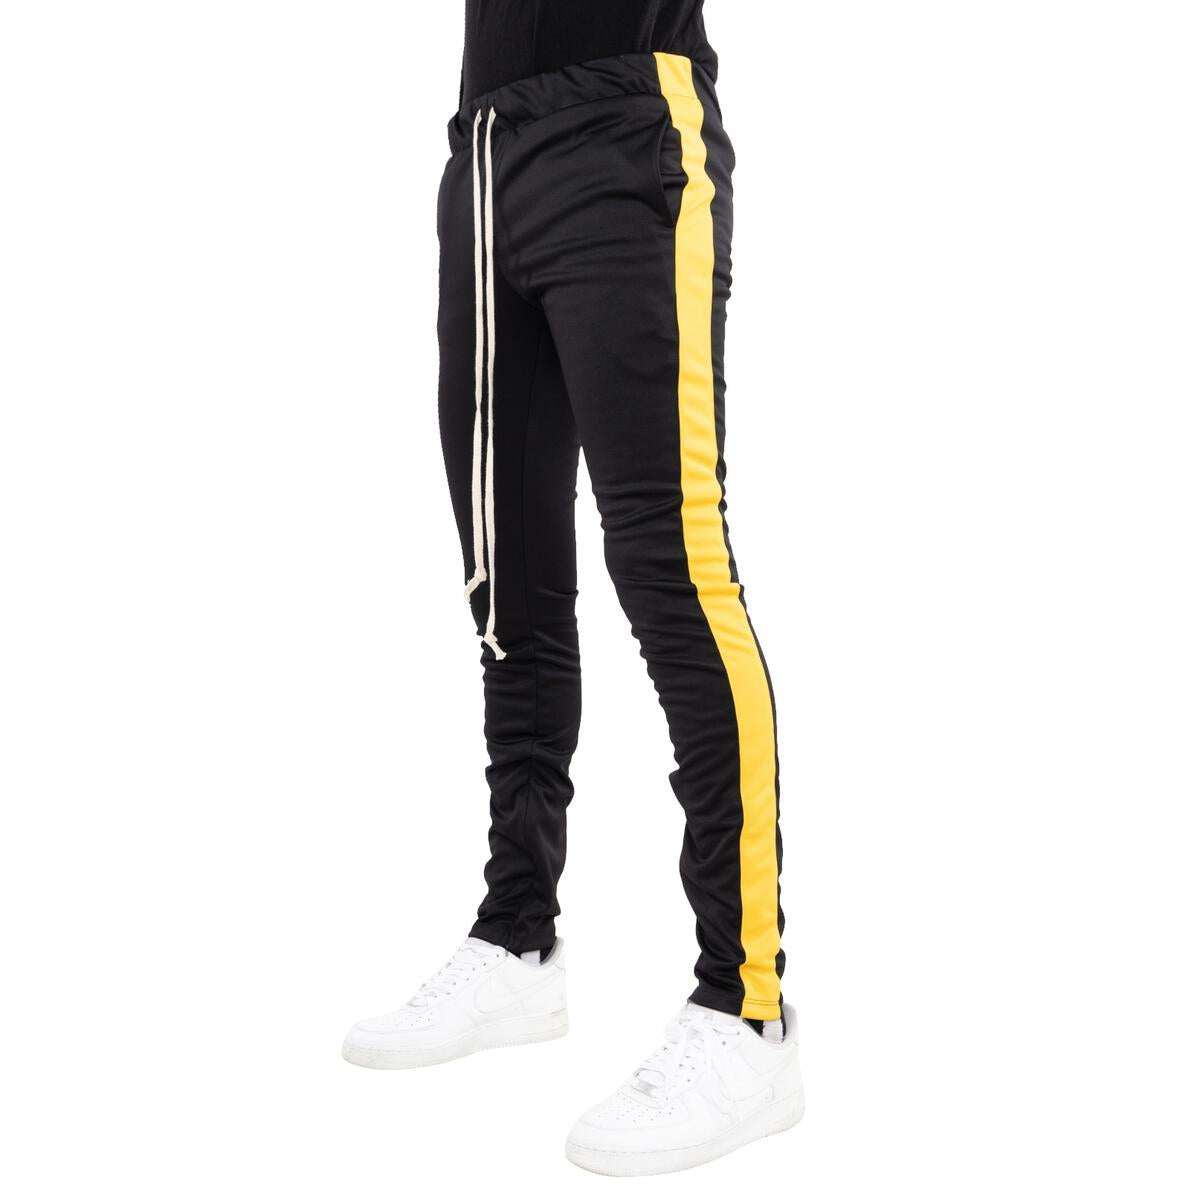 Track Pants In Black/Yellow